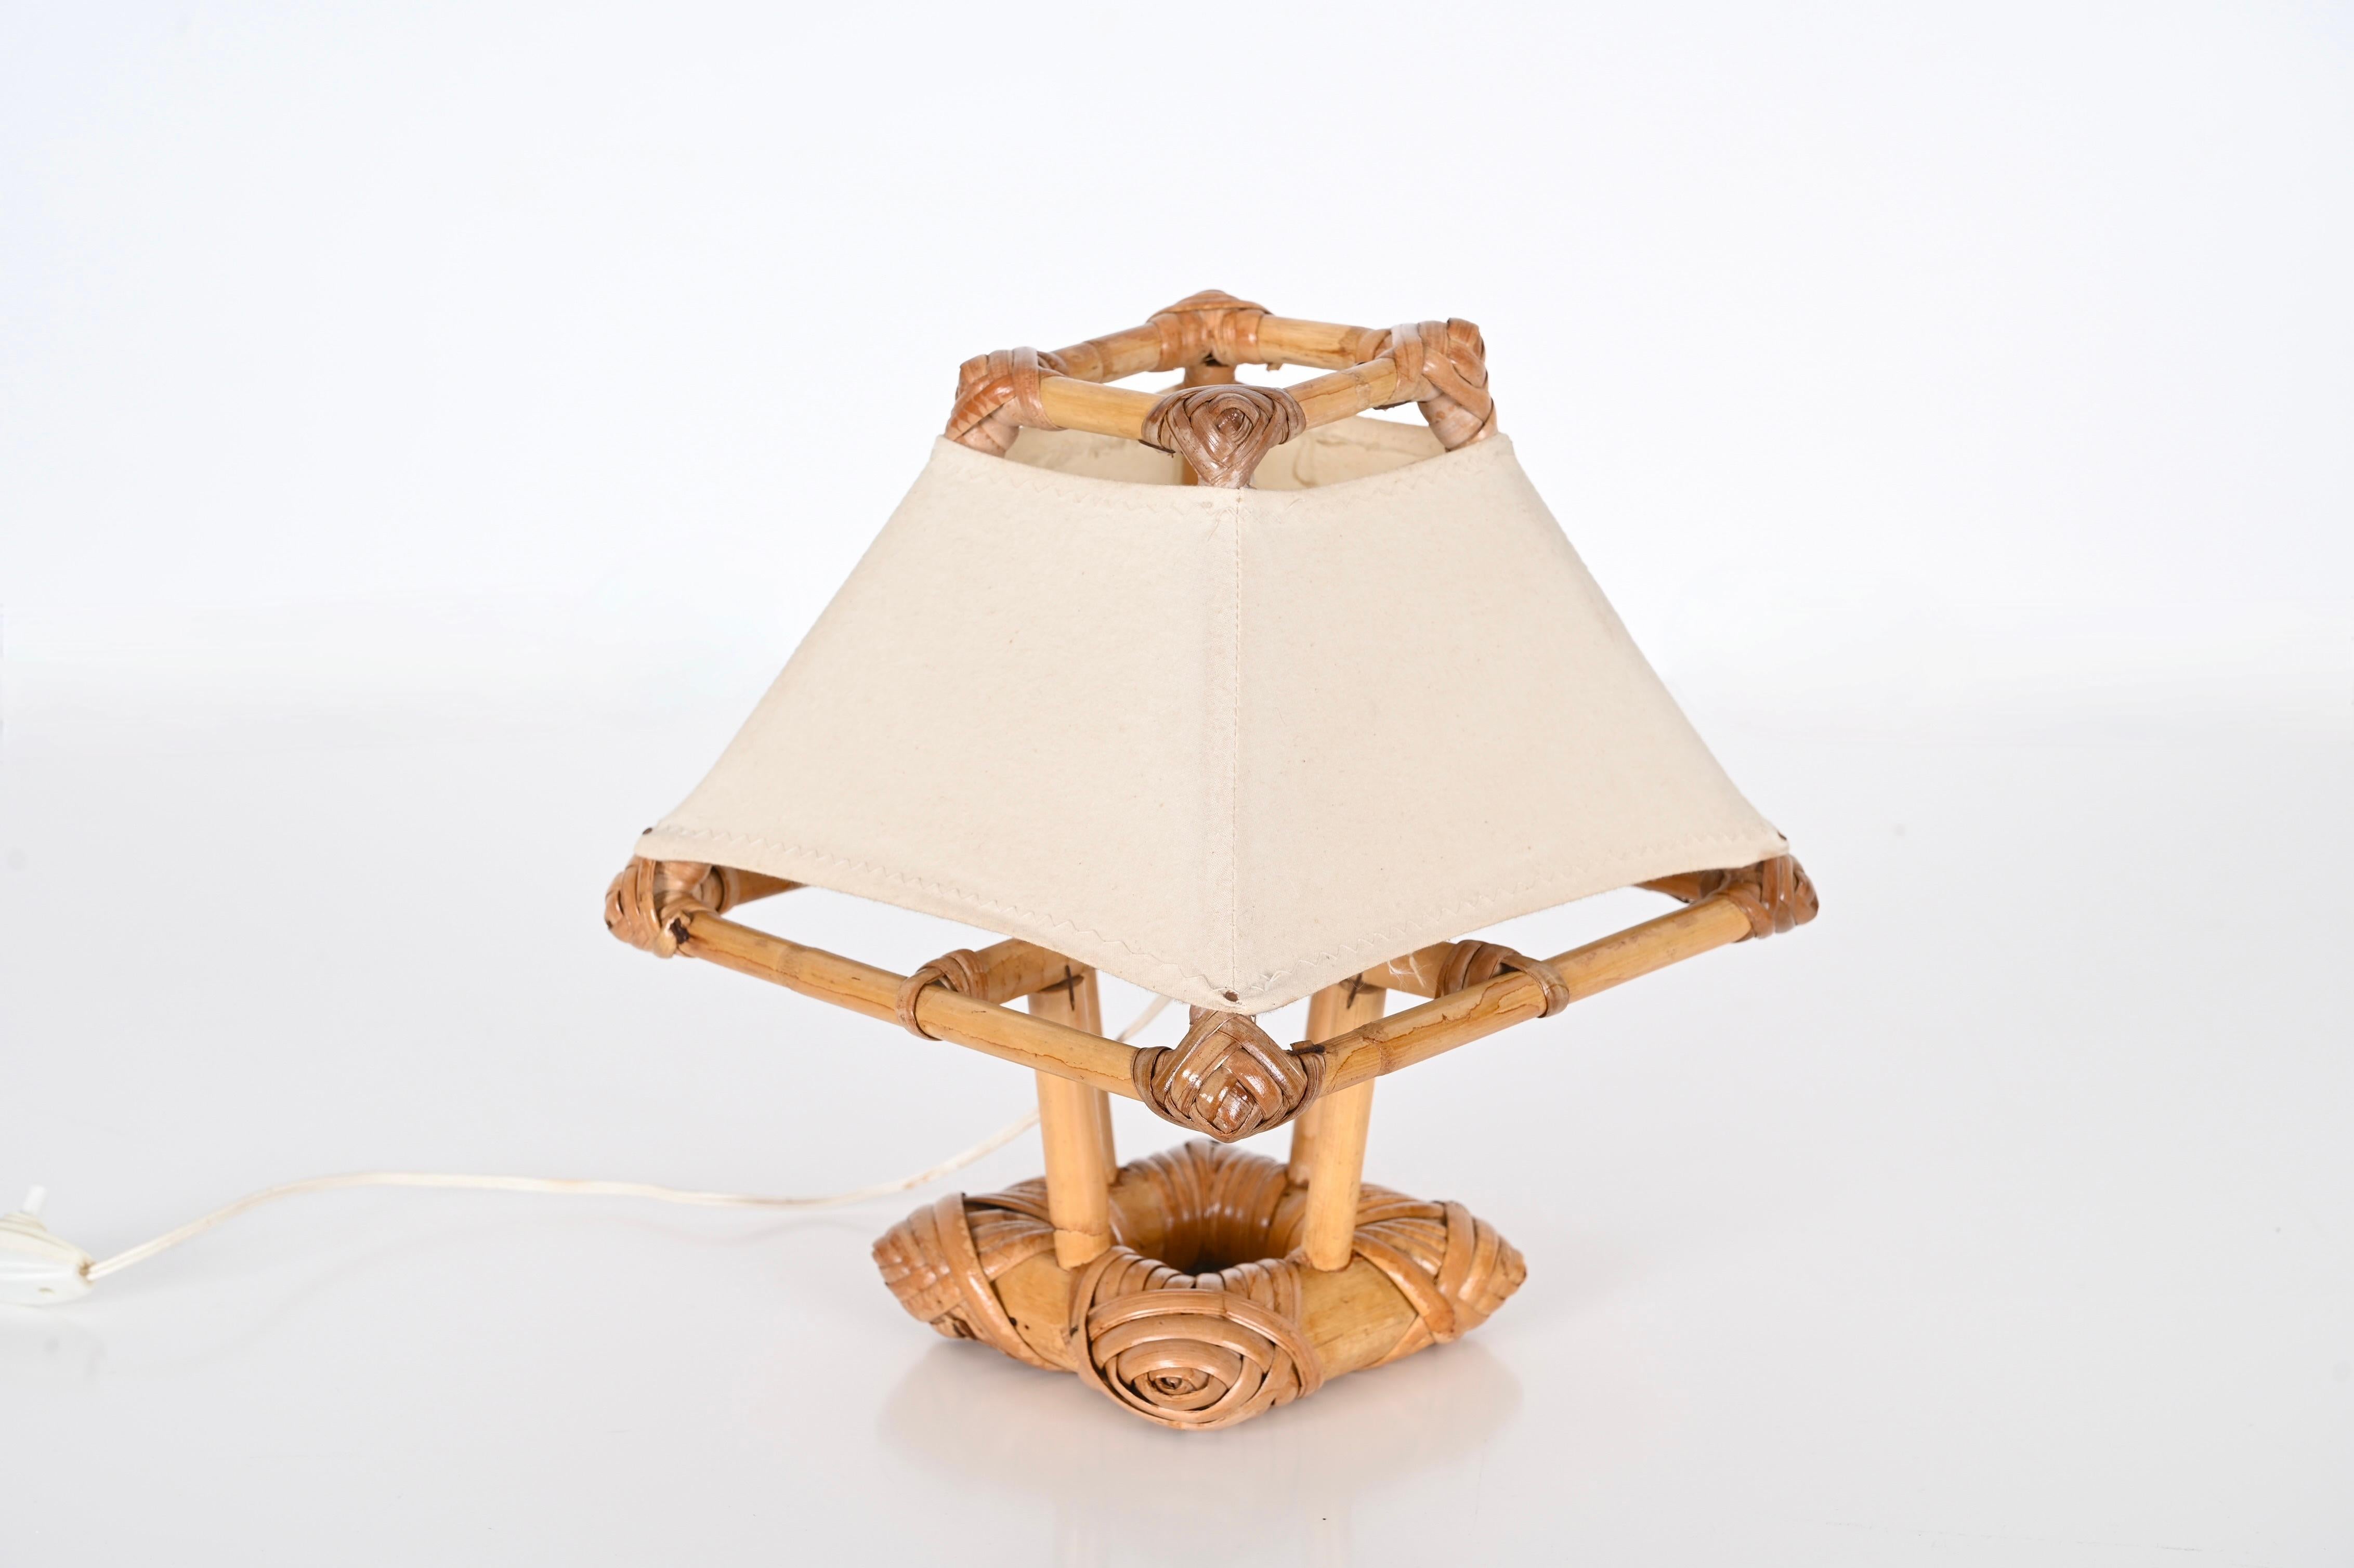 Gorgeous midcentury table lamp in rattan, bamboo and fabric. This fantastic piece was made in France in the 1960s and is attributed to Louis Sognot.

The lamp is striking because it features a clear example of 1960s craftsmanship and design, with